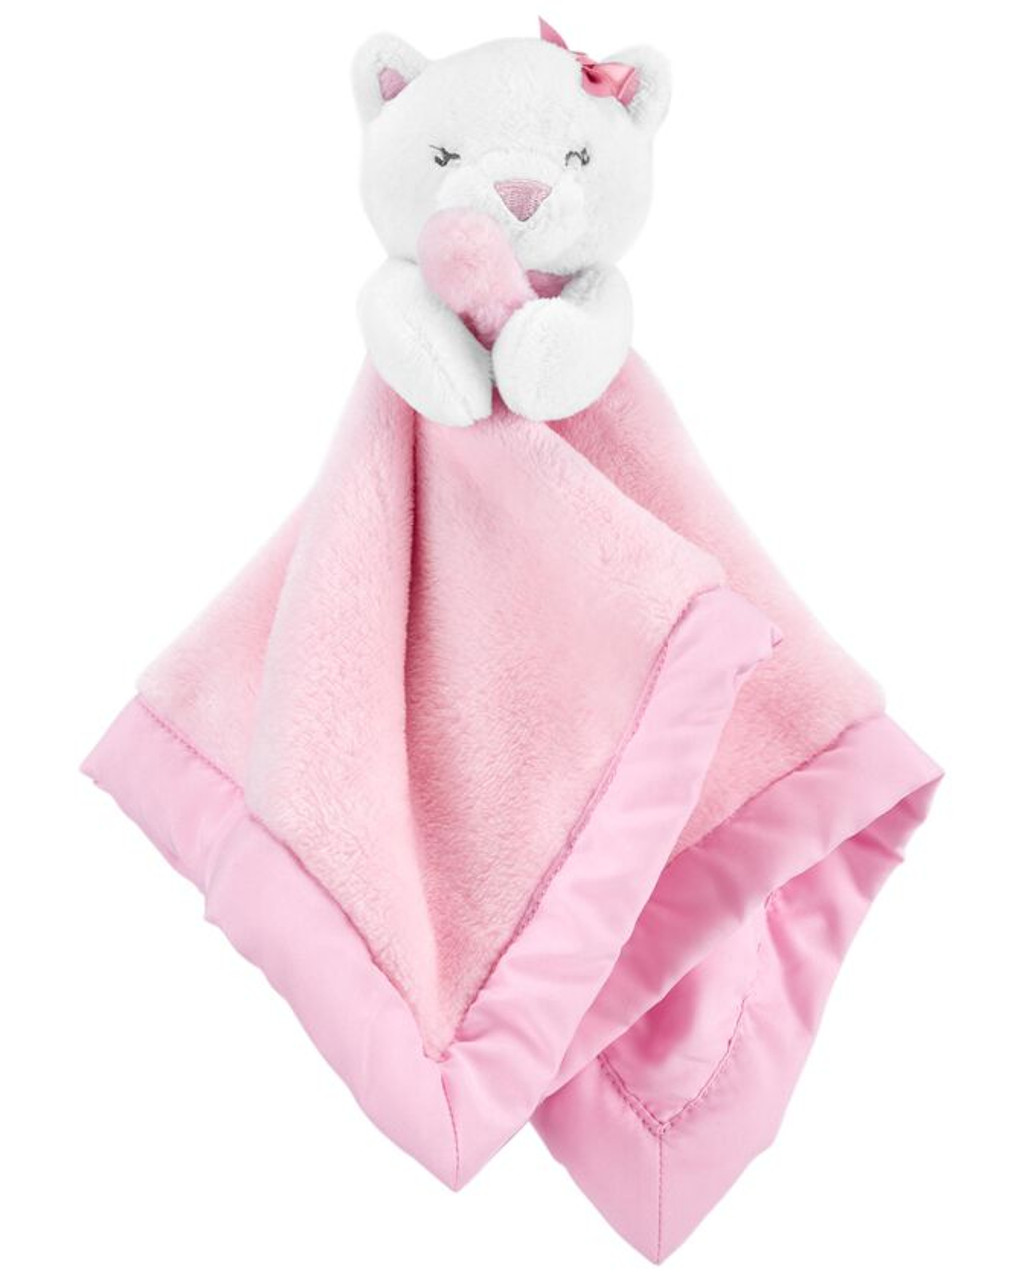 Snuggle Cat Blanket - Super Kitty Cats